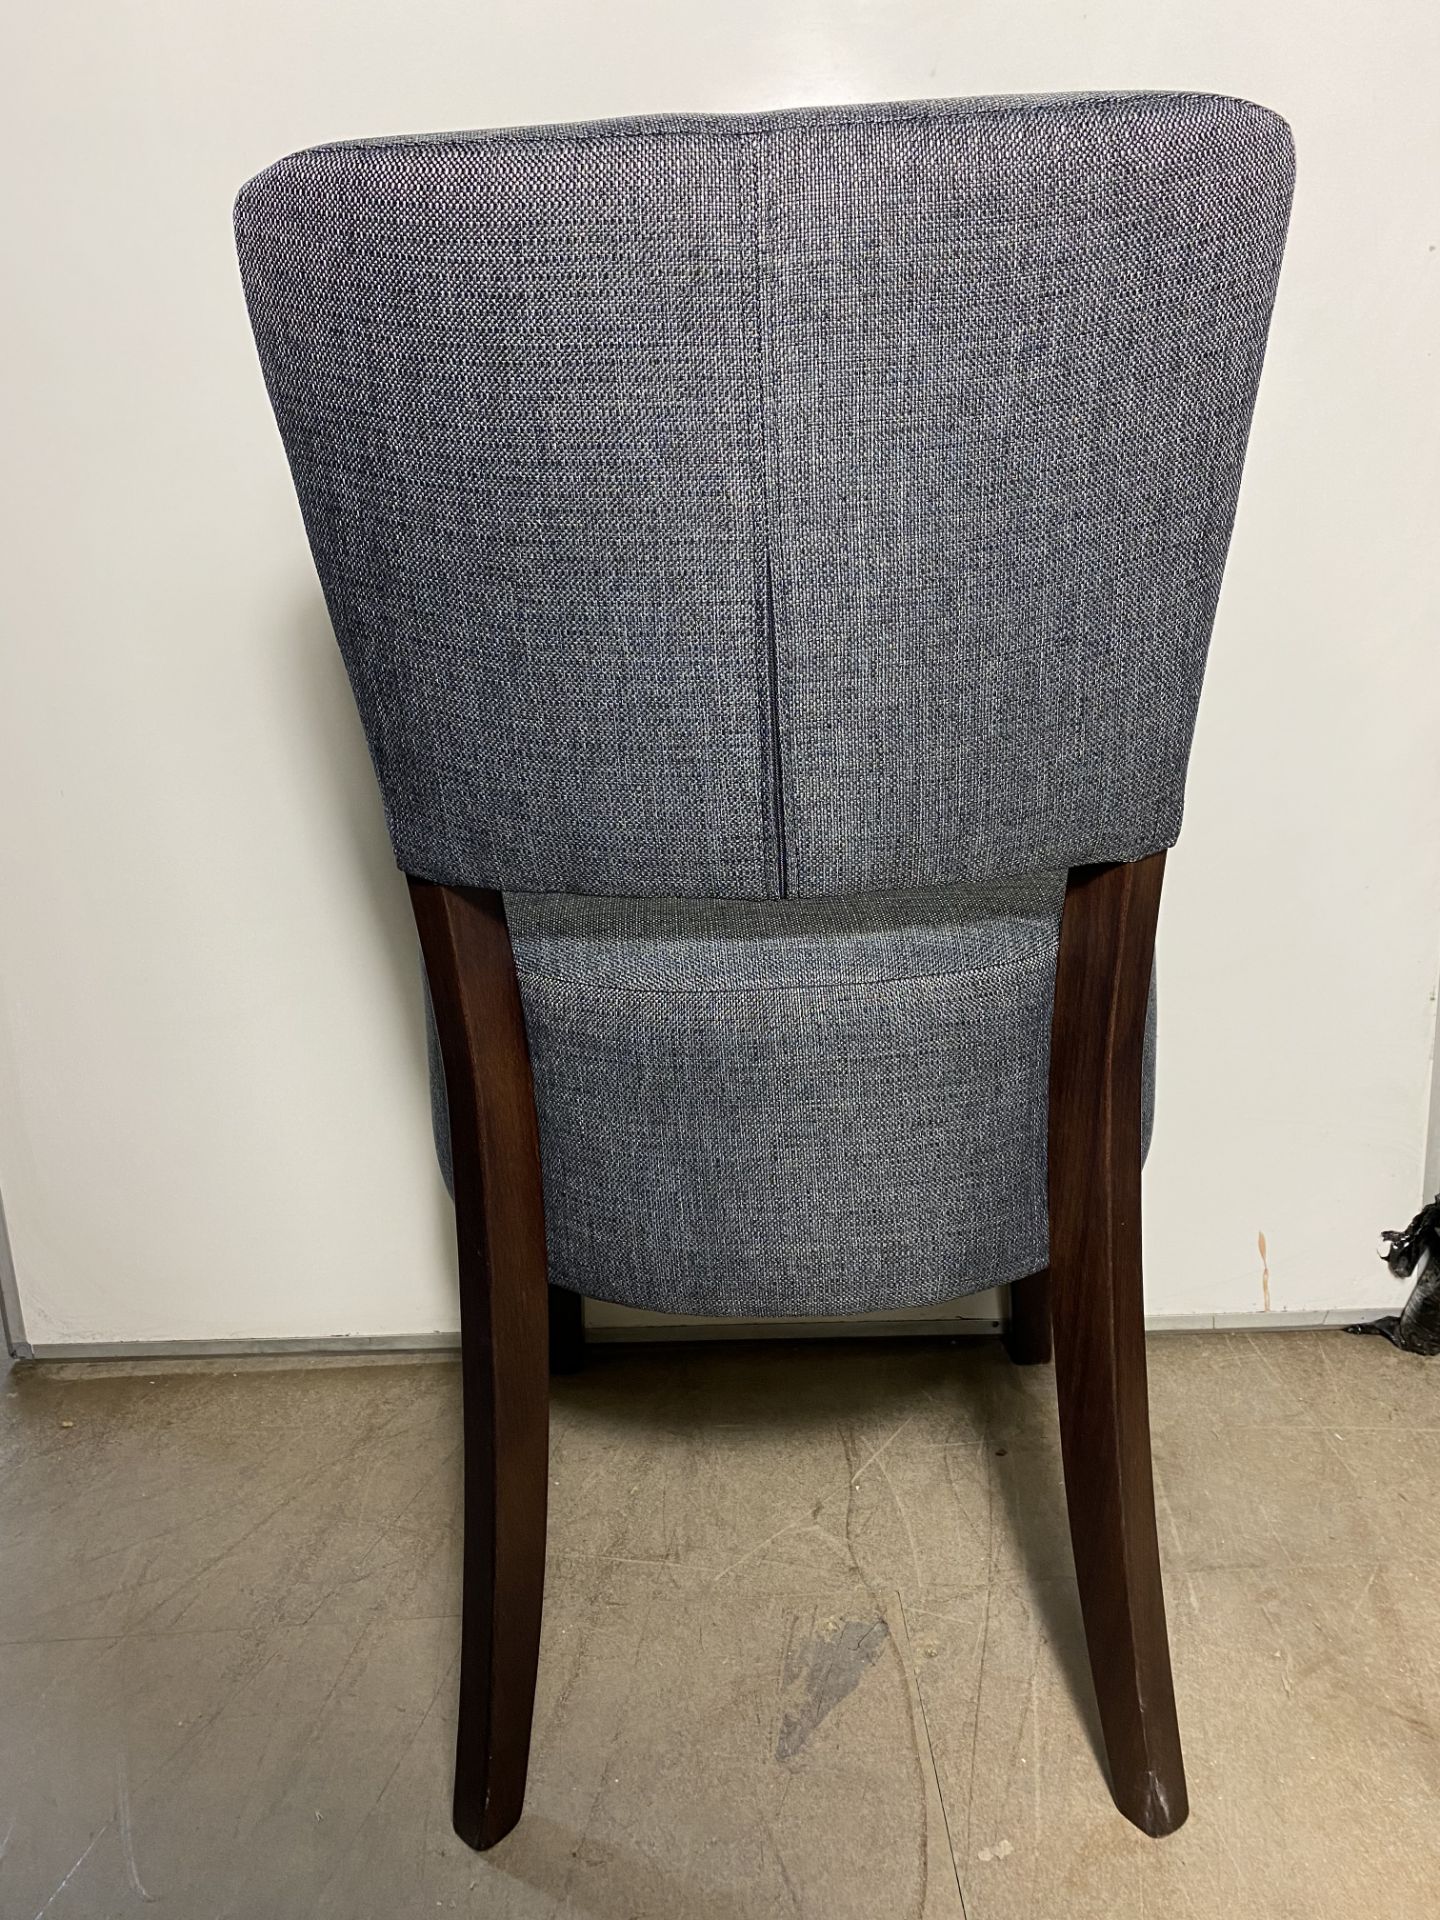 4 x Next Memphis Side Chairs | 10TN05 - Image 3 of 5